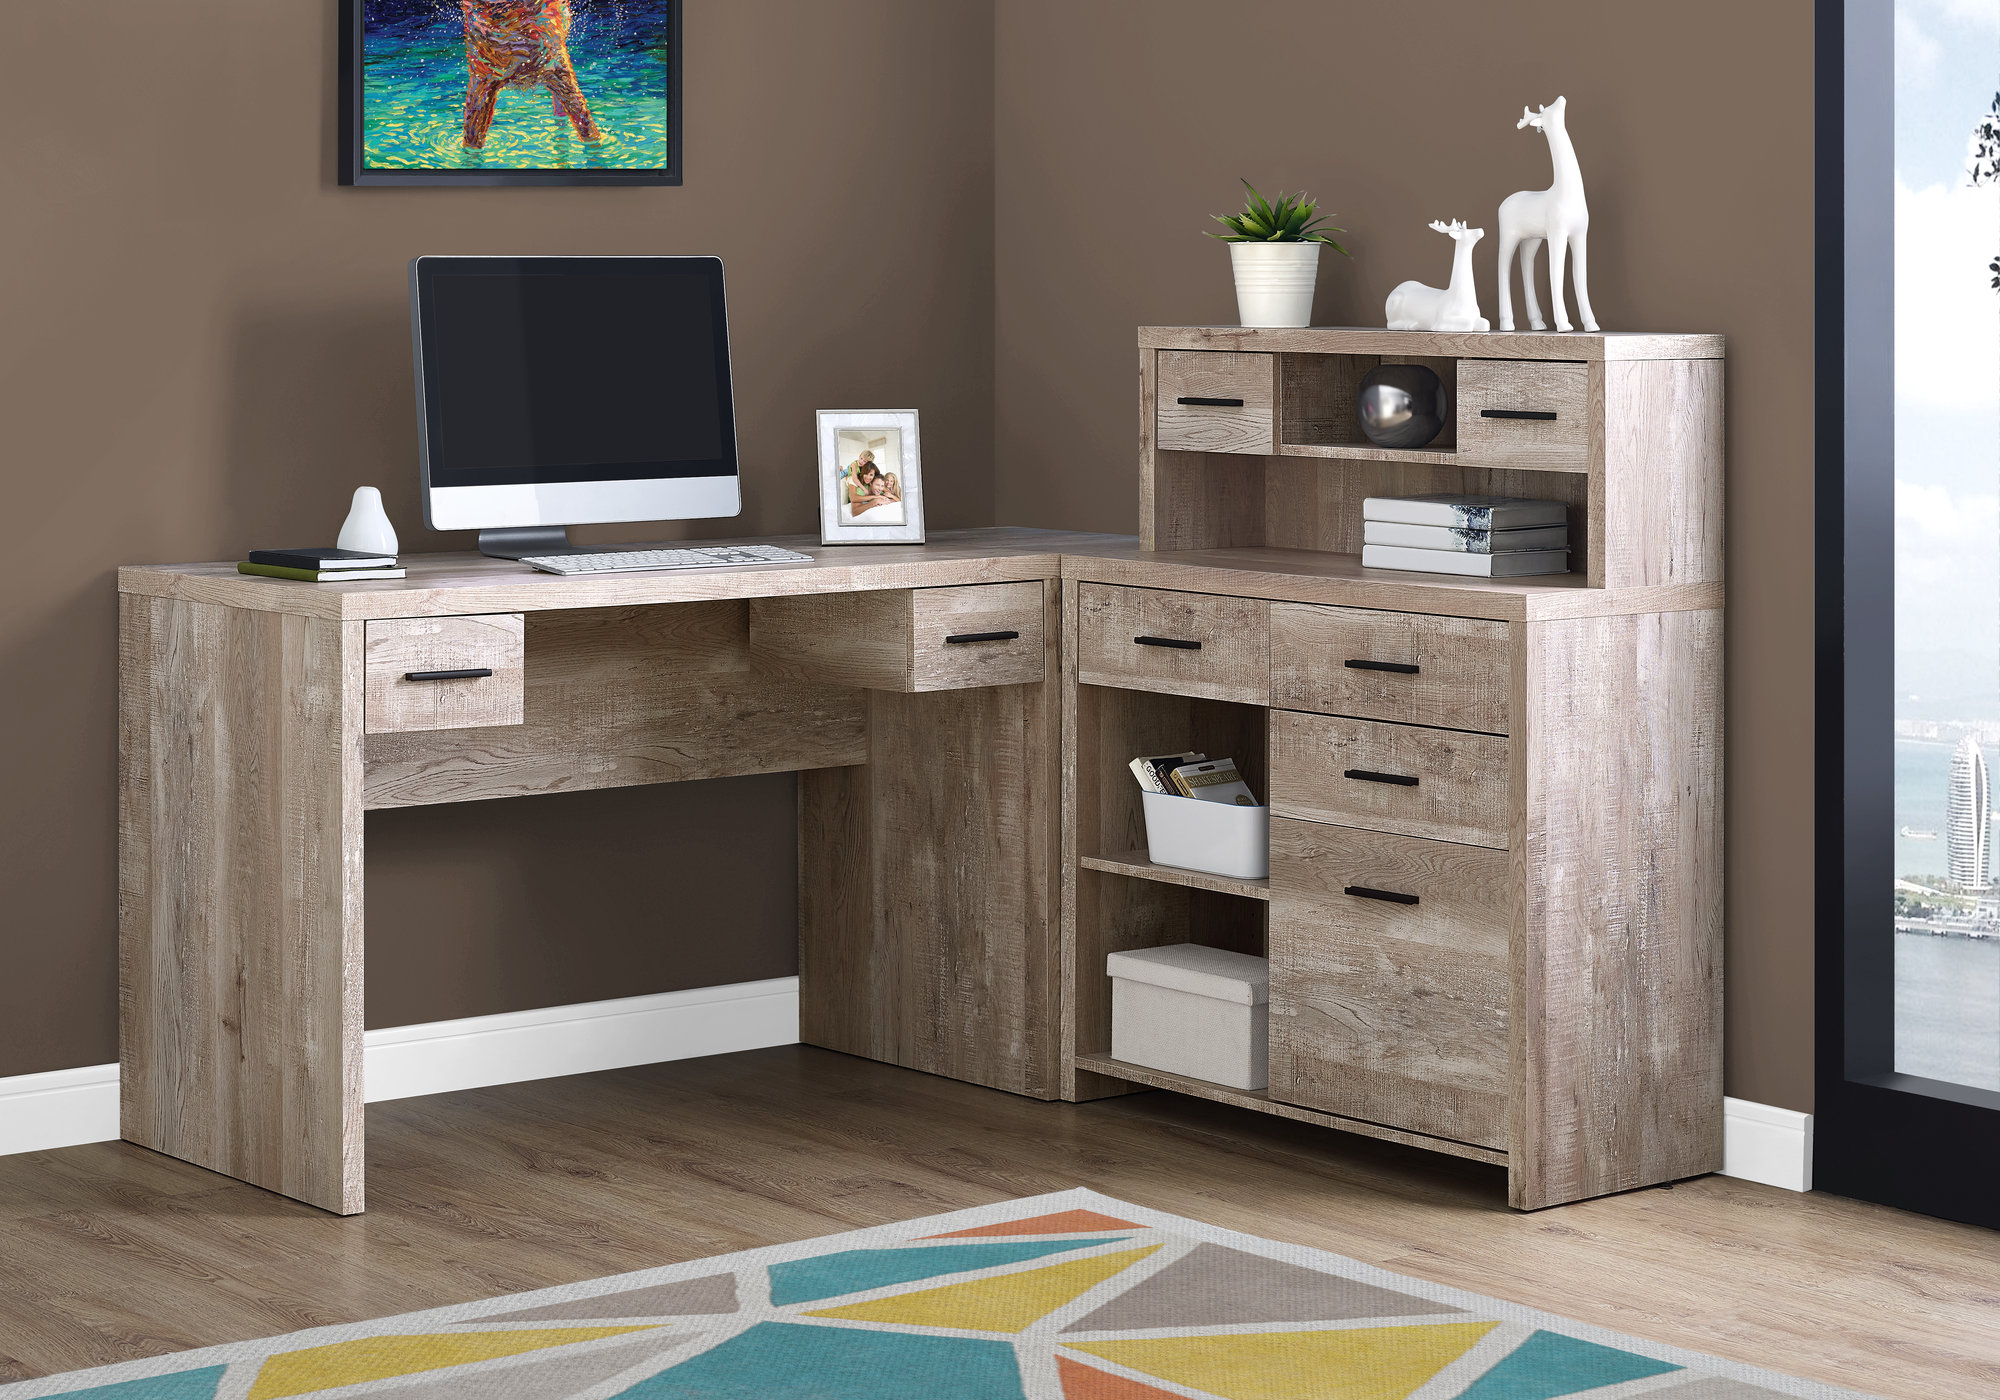 Top 5 Ideas For Designing Your Home Office Elegantly